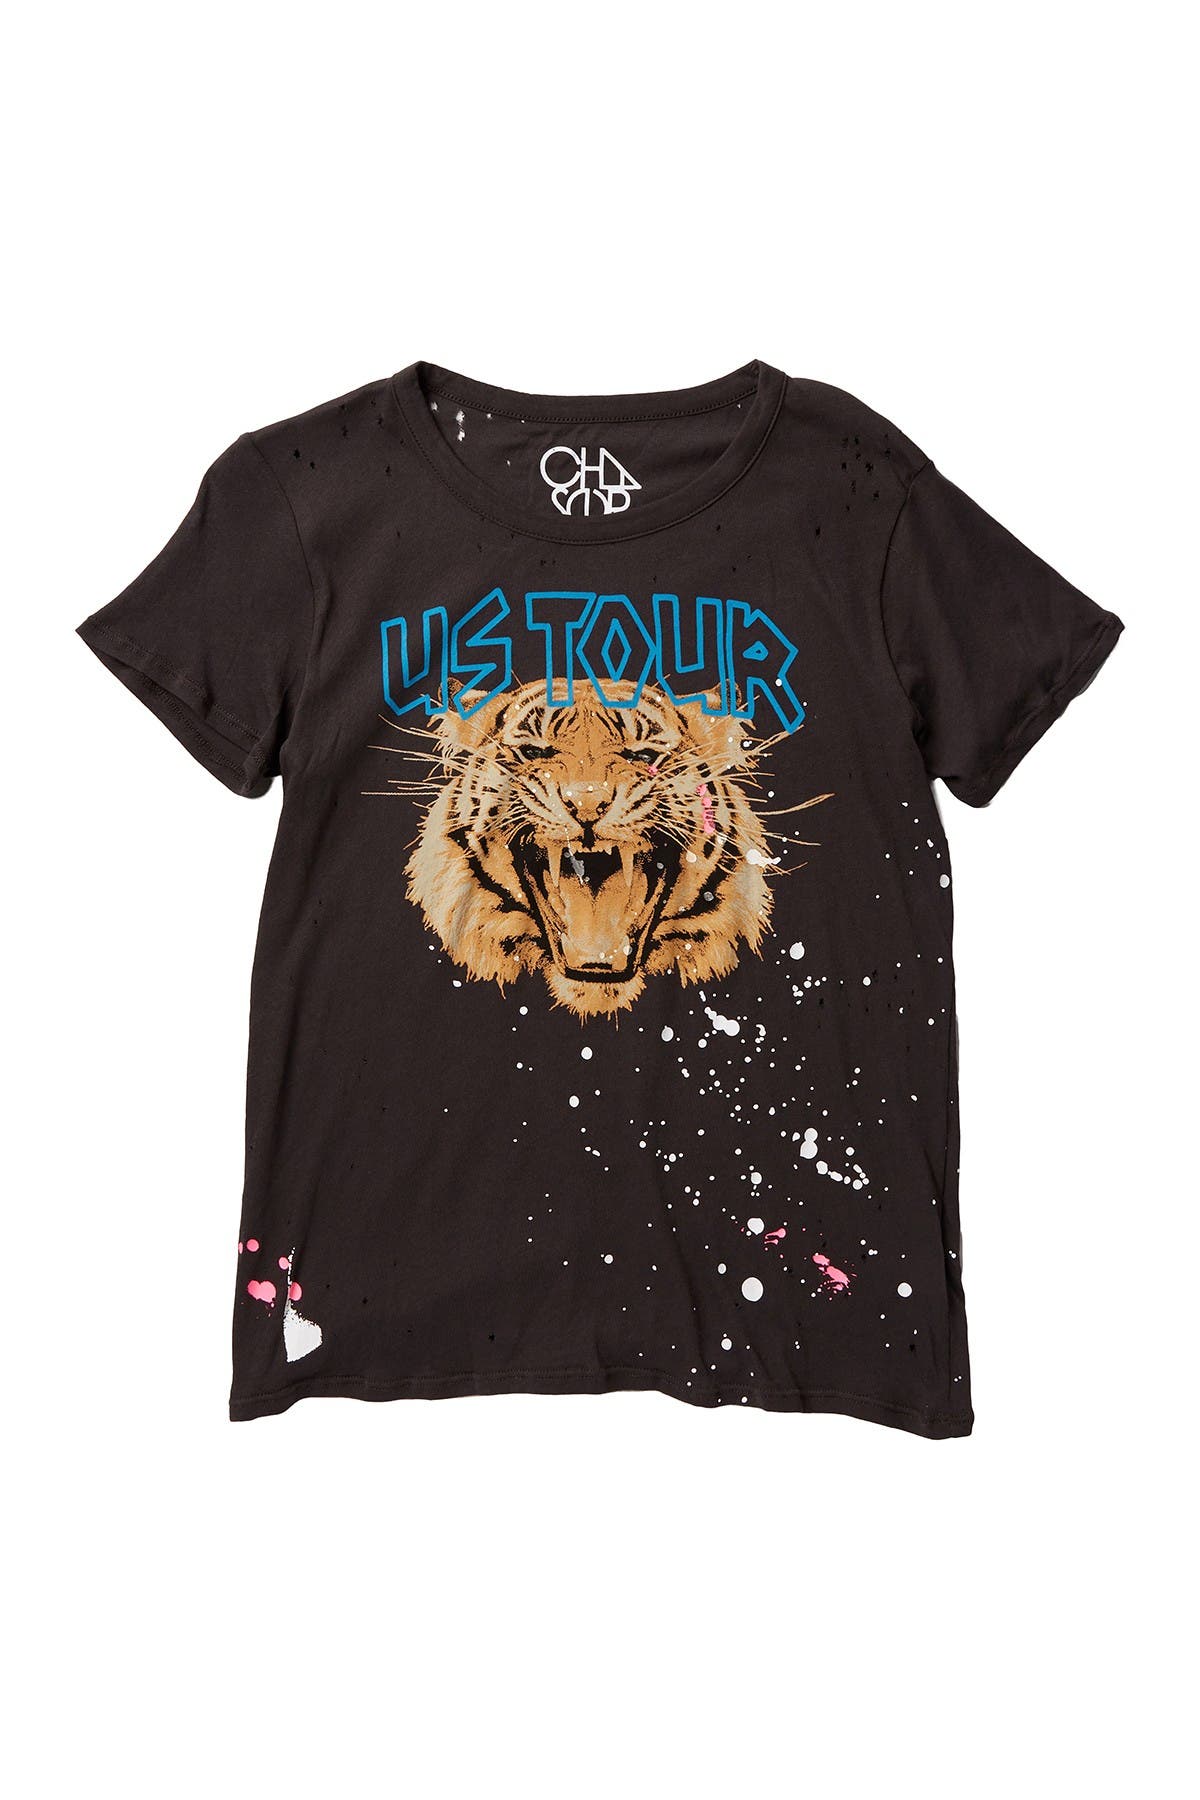 chaser tiger tee